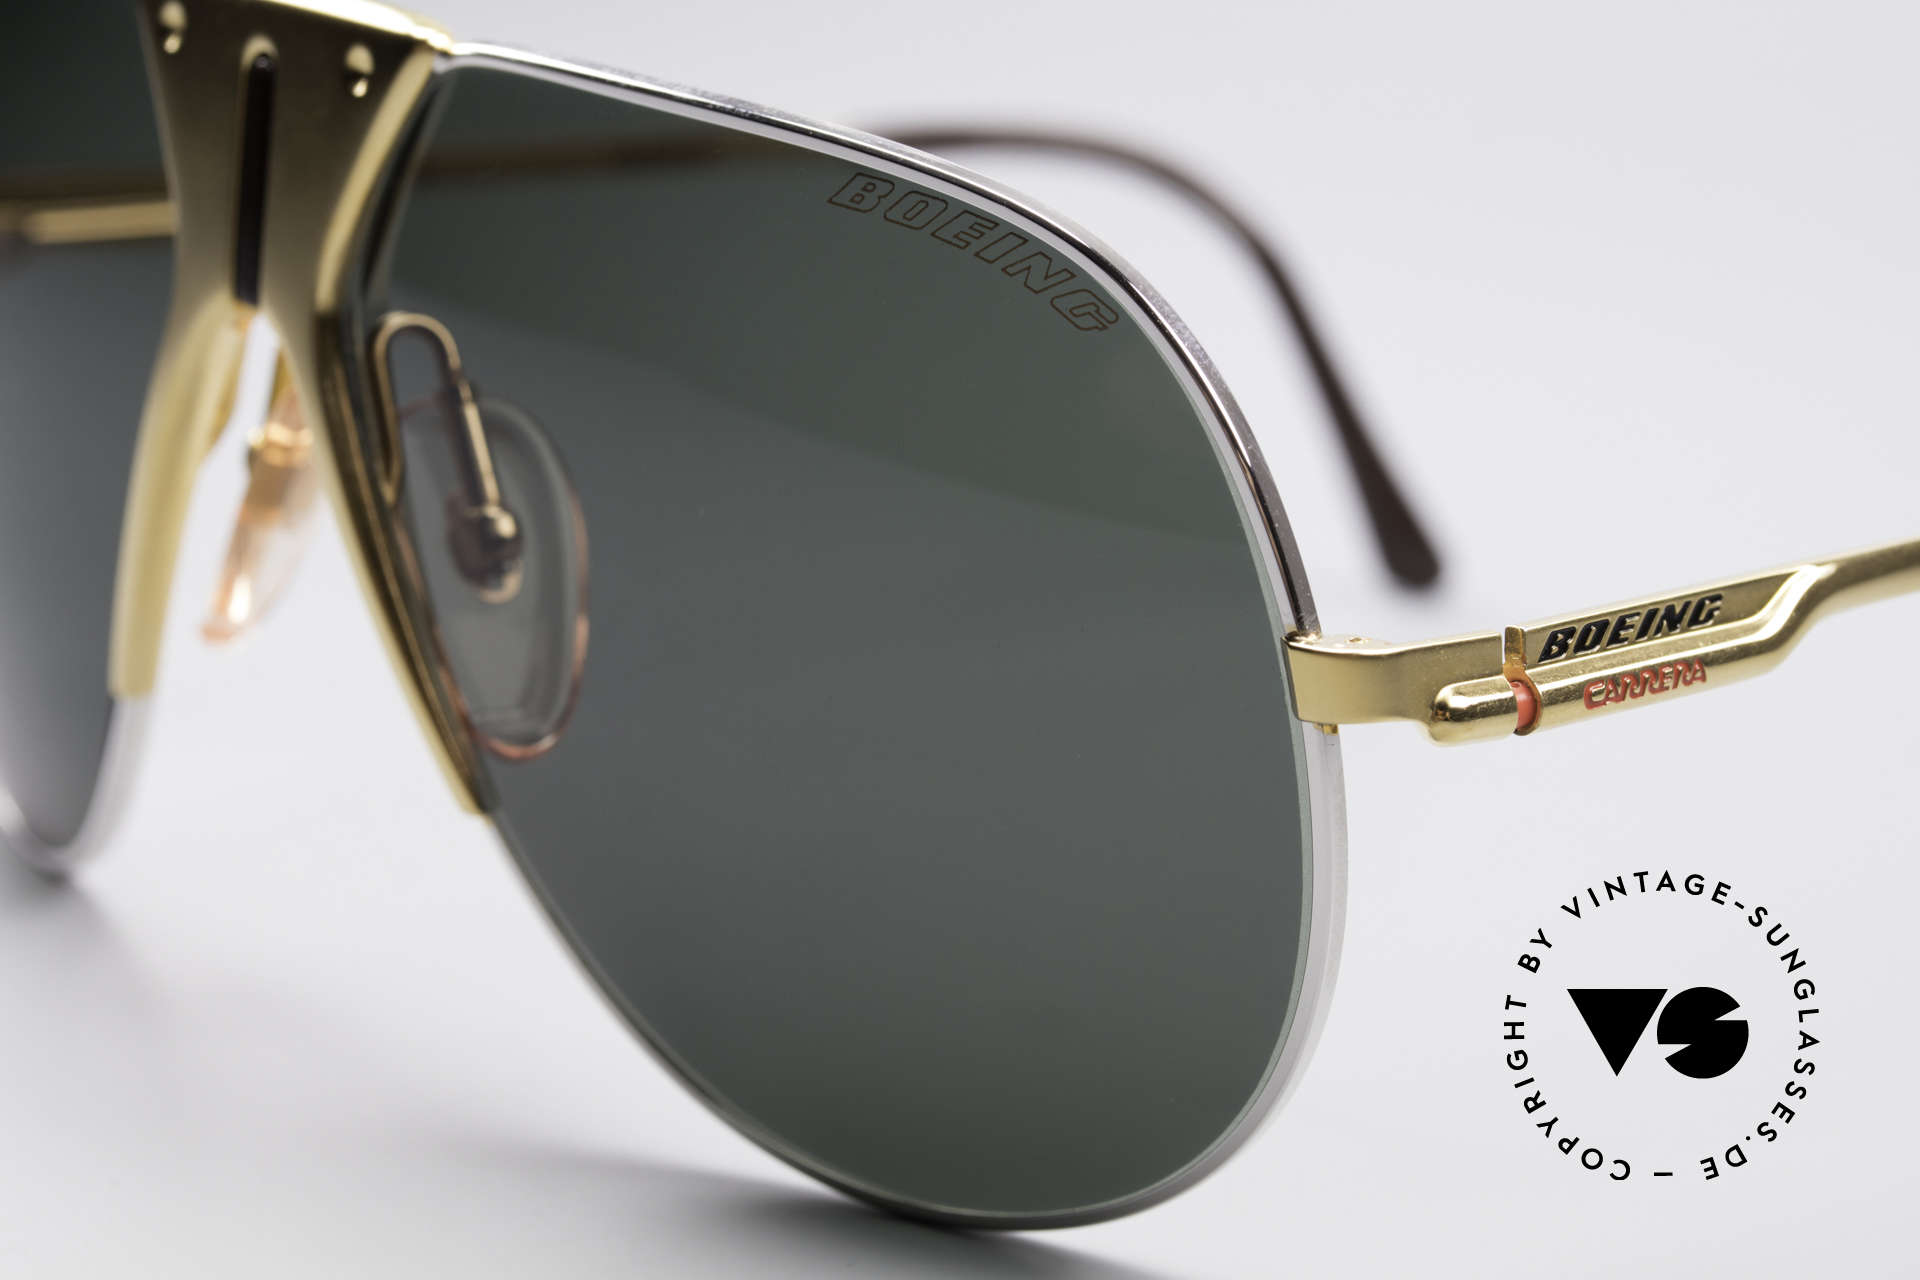 Boeing 5701 Famous 80's Pilots Shades, hybrid between functionality, quality and lifestyle, Made for Men and Women